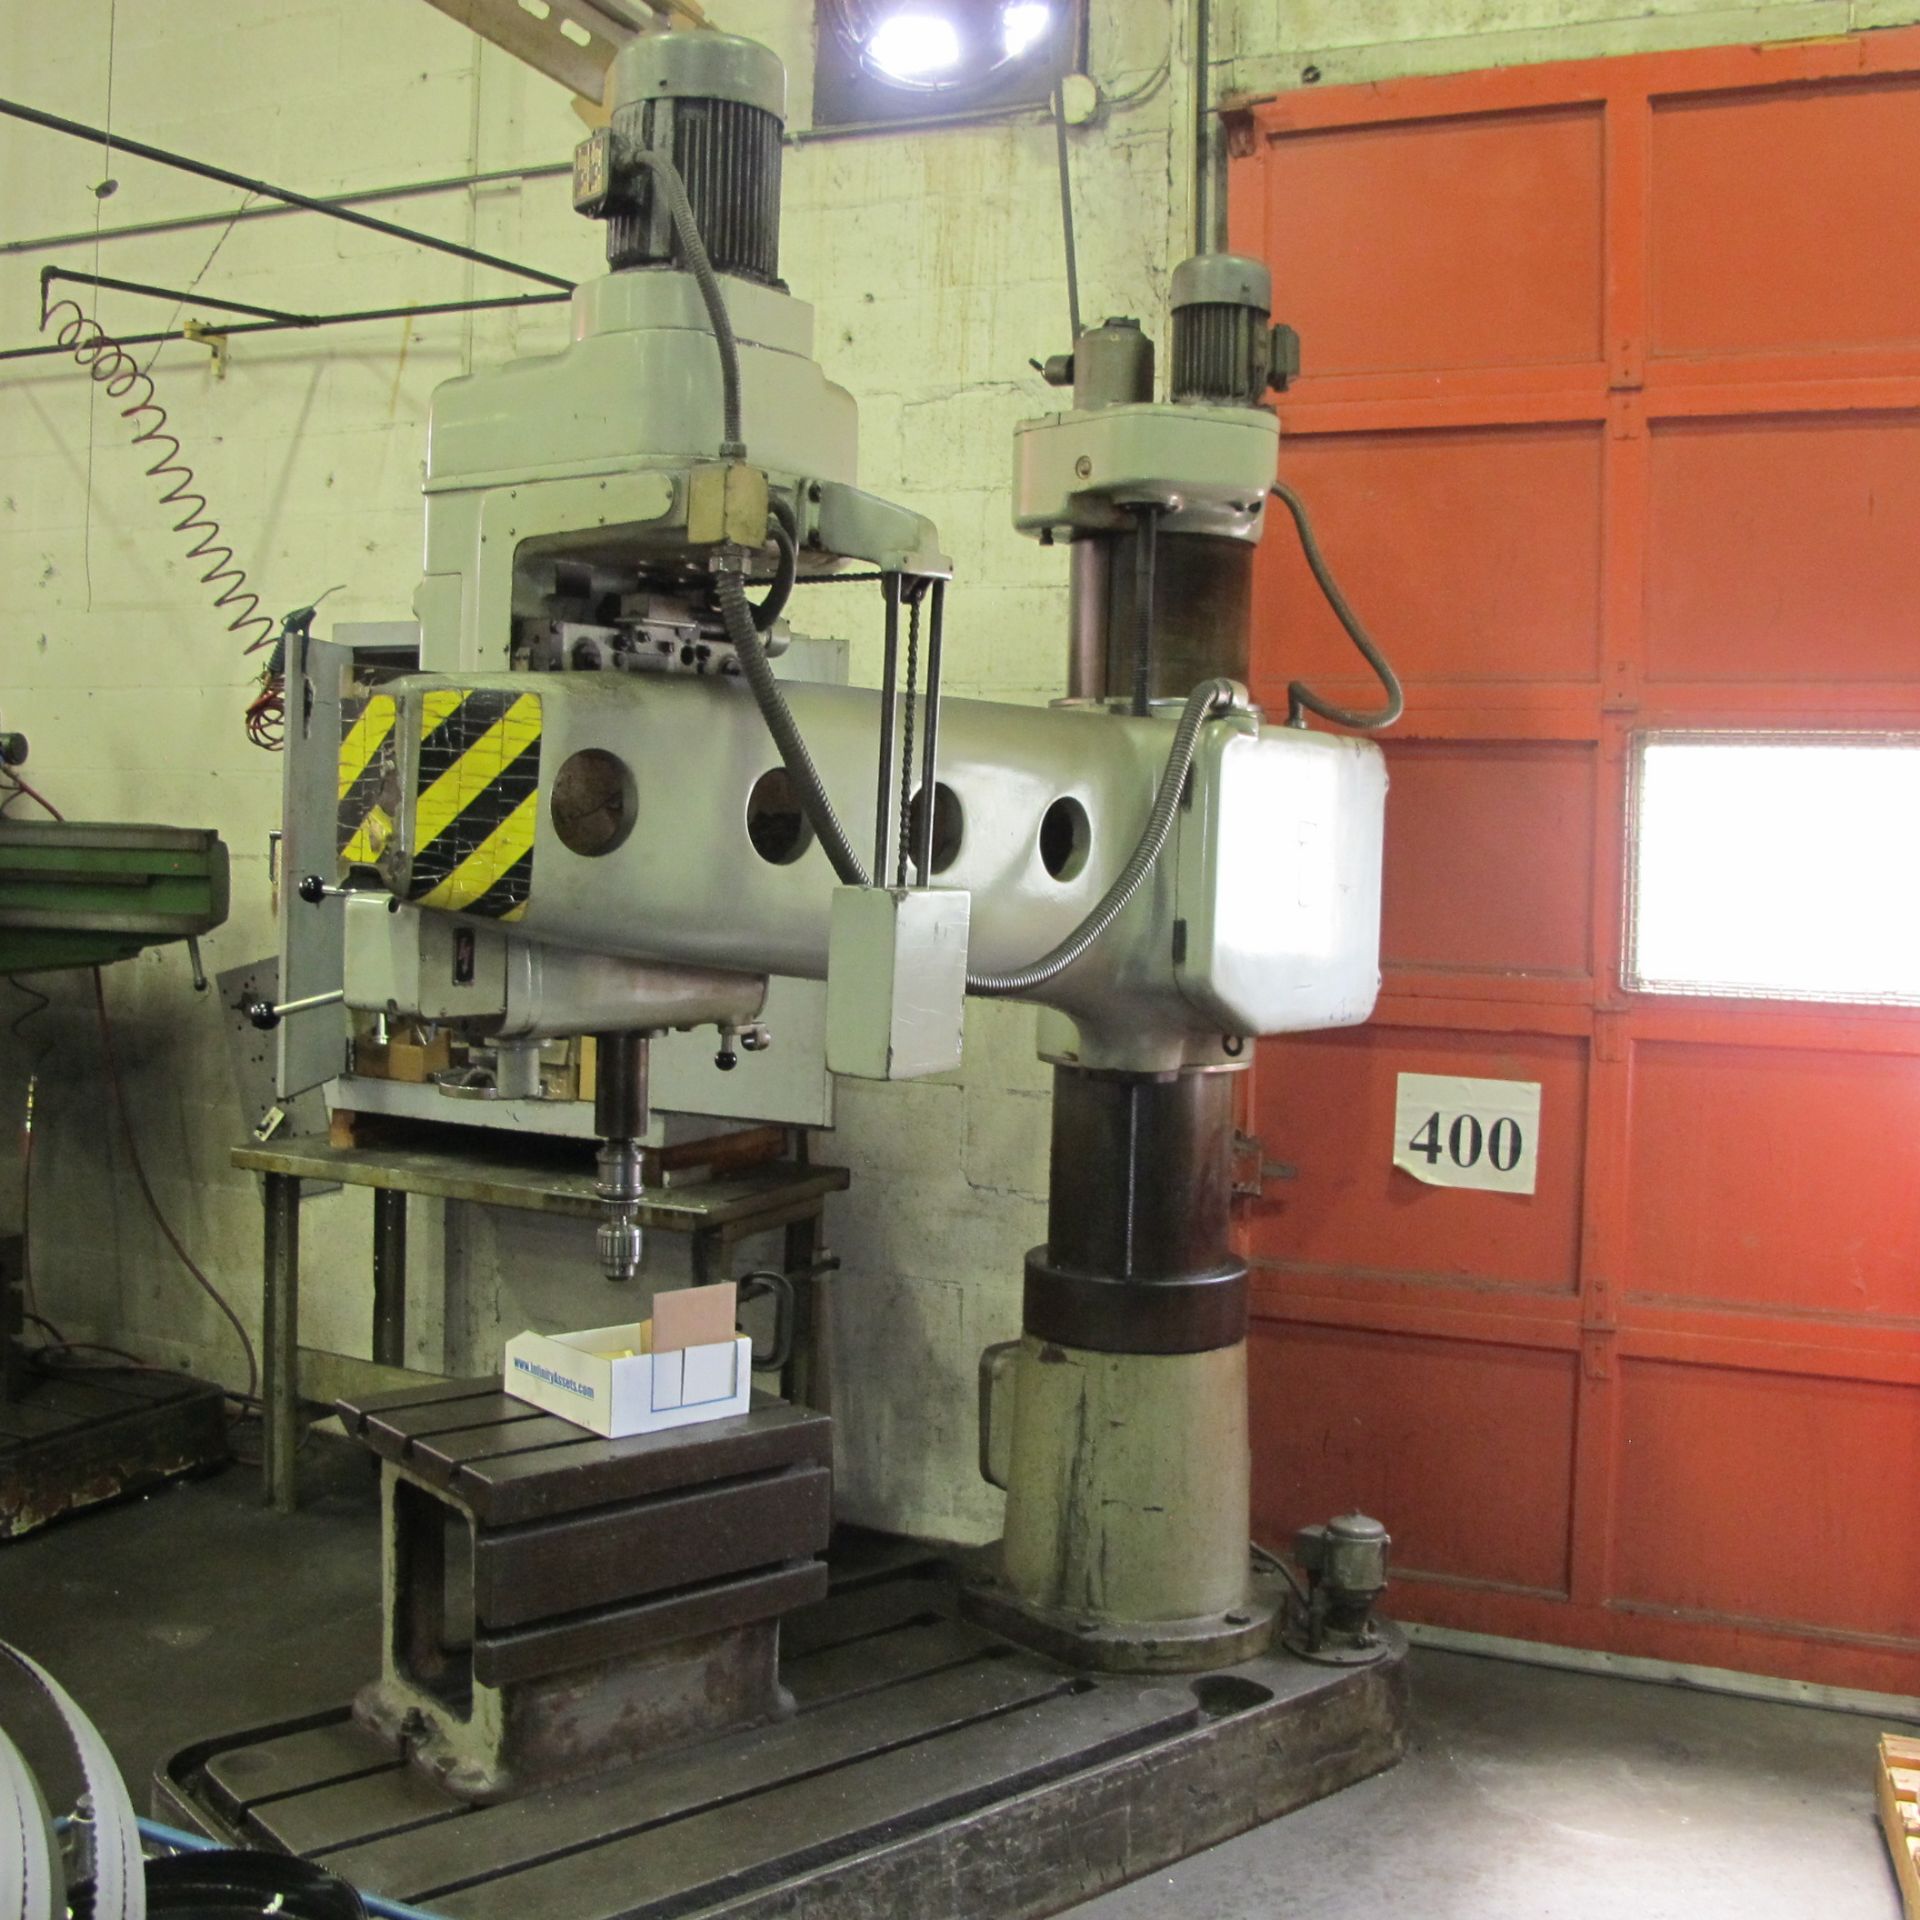 5' RADIAL ARM DRILL W/ 19-1/2"L X 20-1/2"W X 19-1/2"T TABLE, 50 TO 2240 RPM, JACOBS CHUCK, 4HP - Image 5 of 7